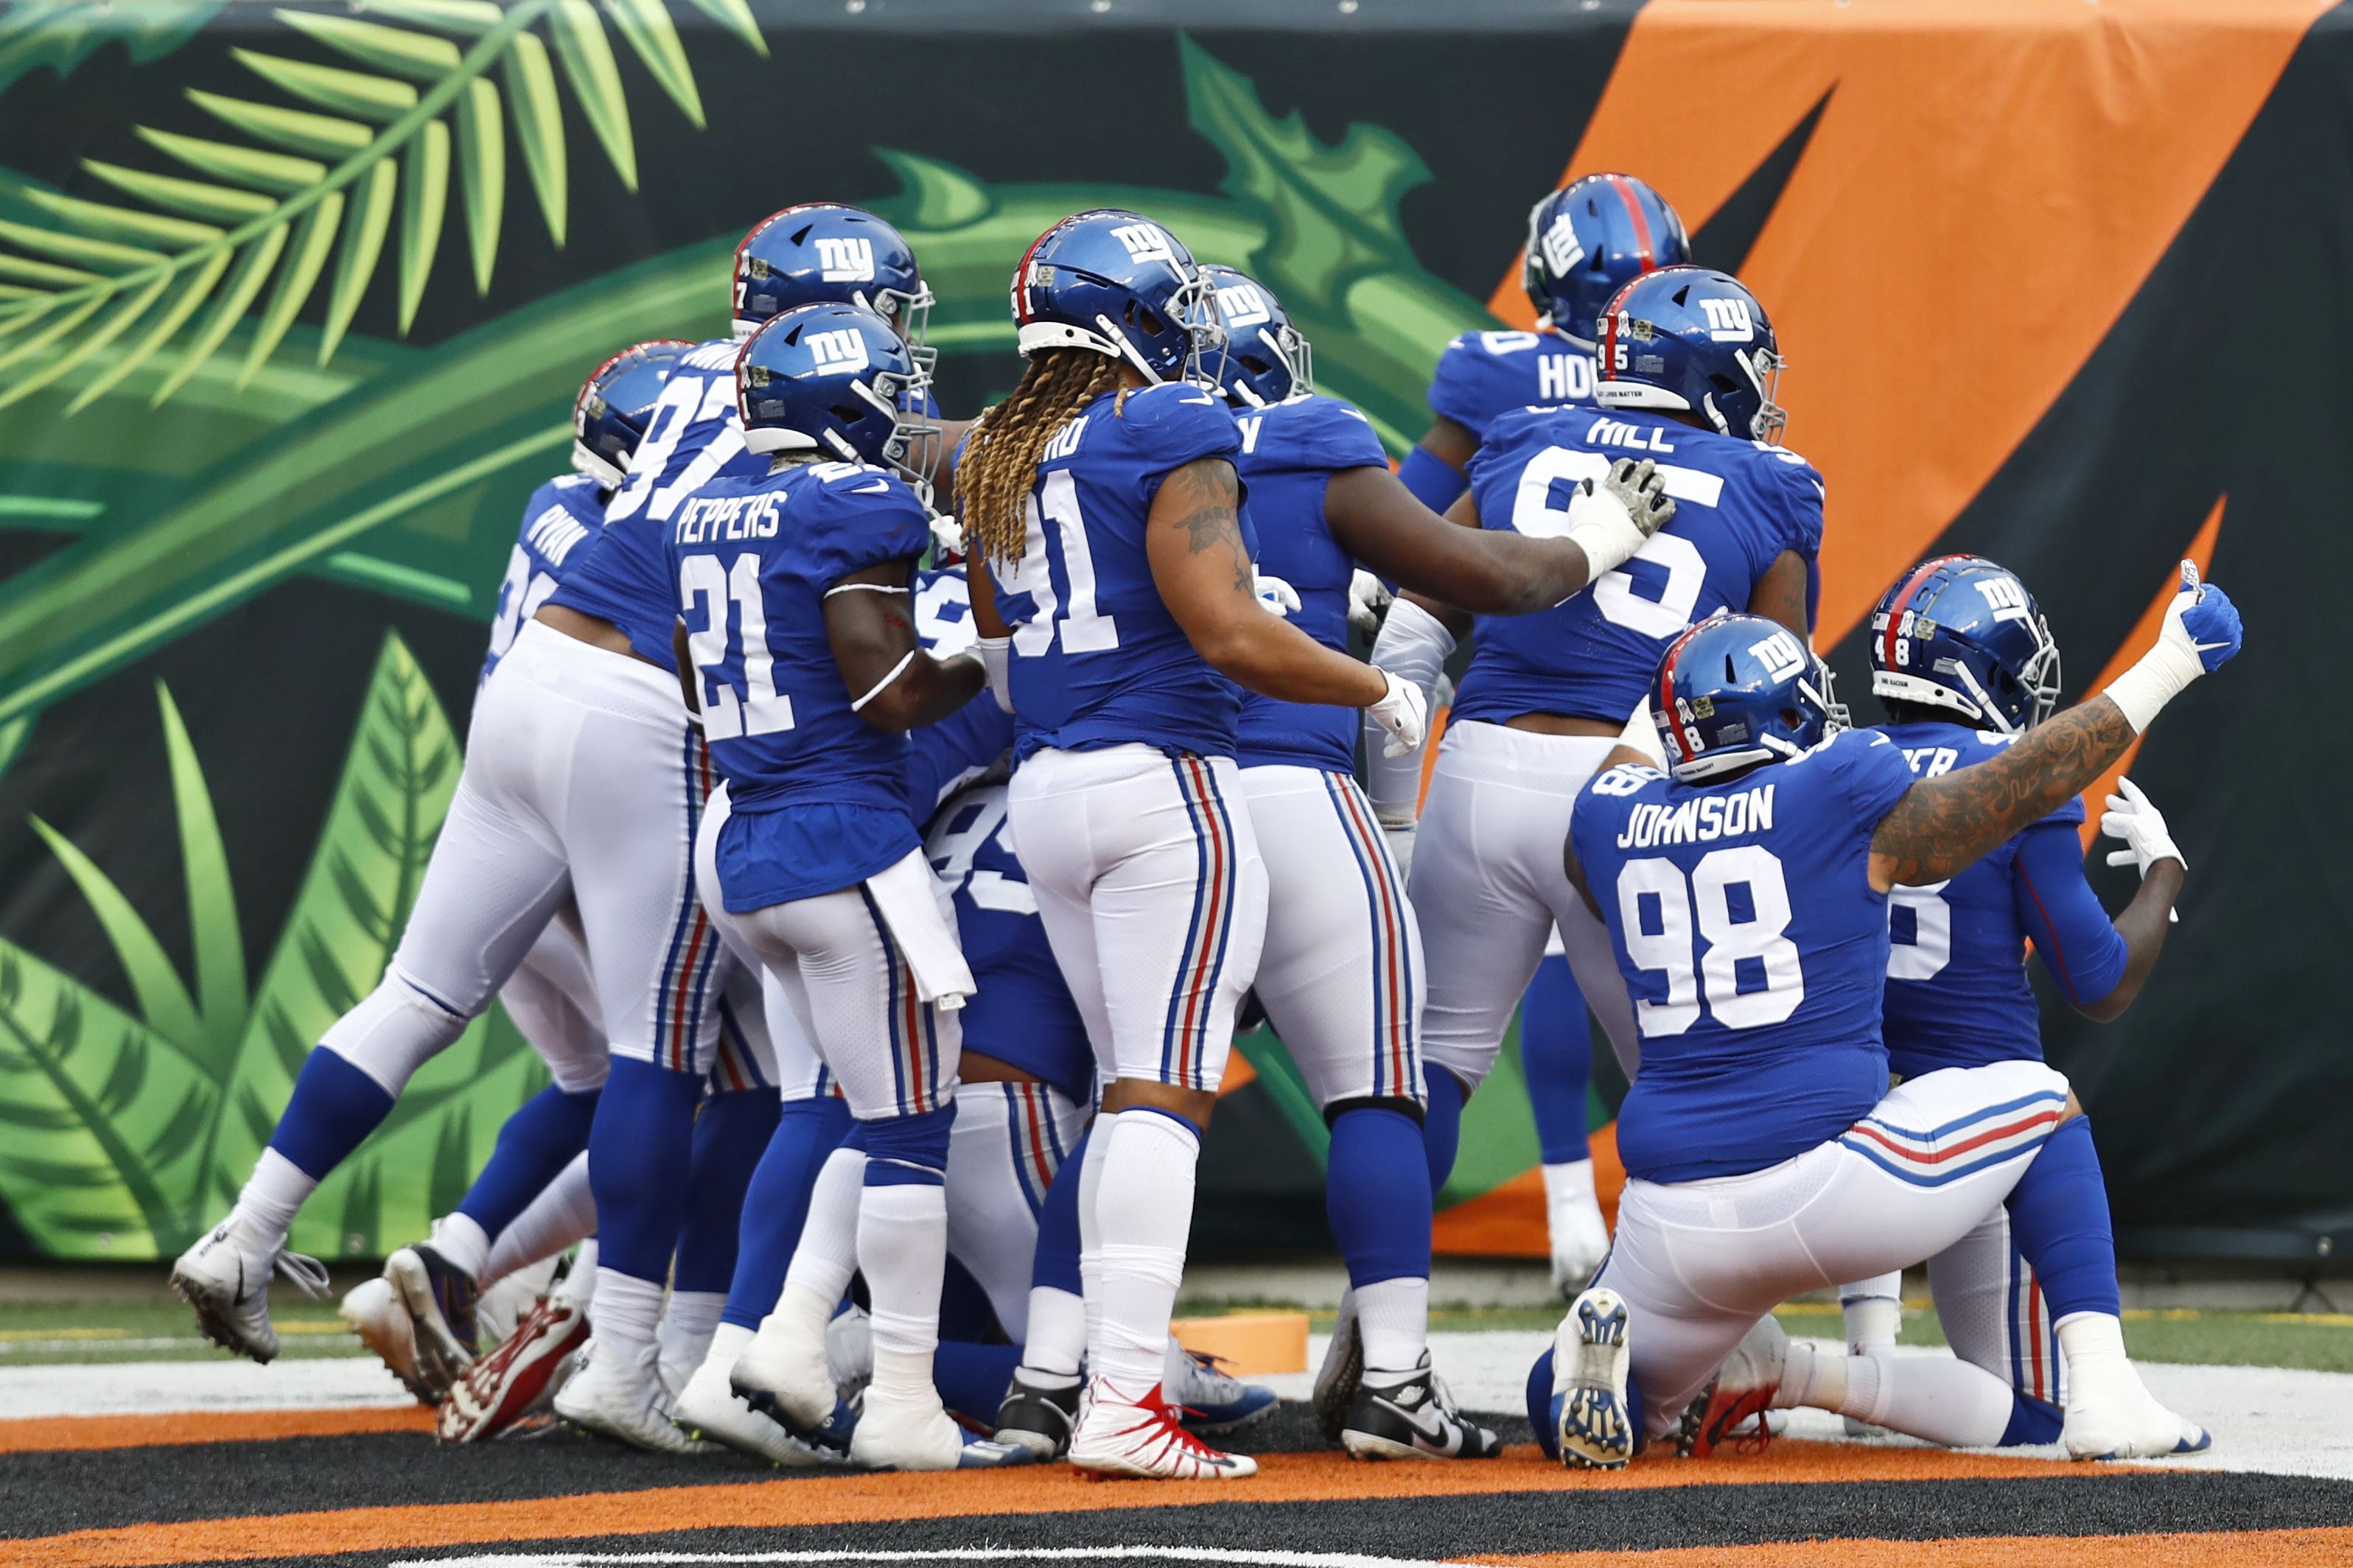 NFL insider predicts how many wins it will take for Giants to